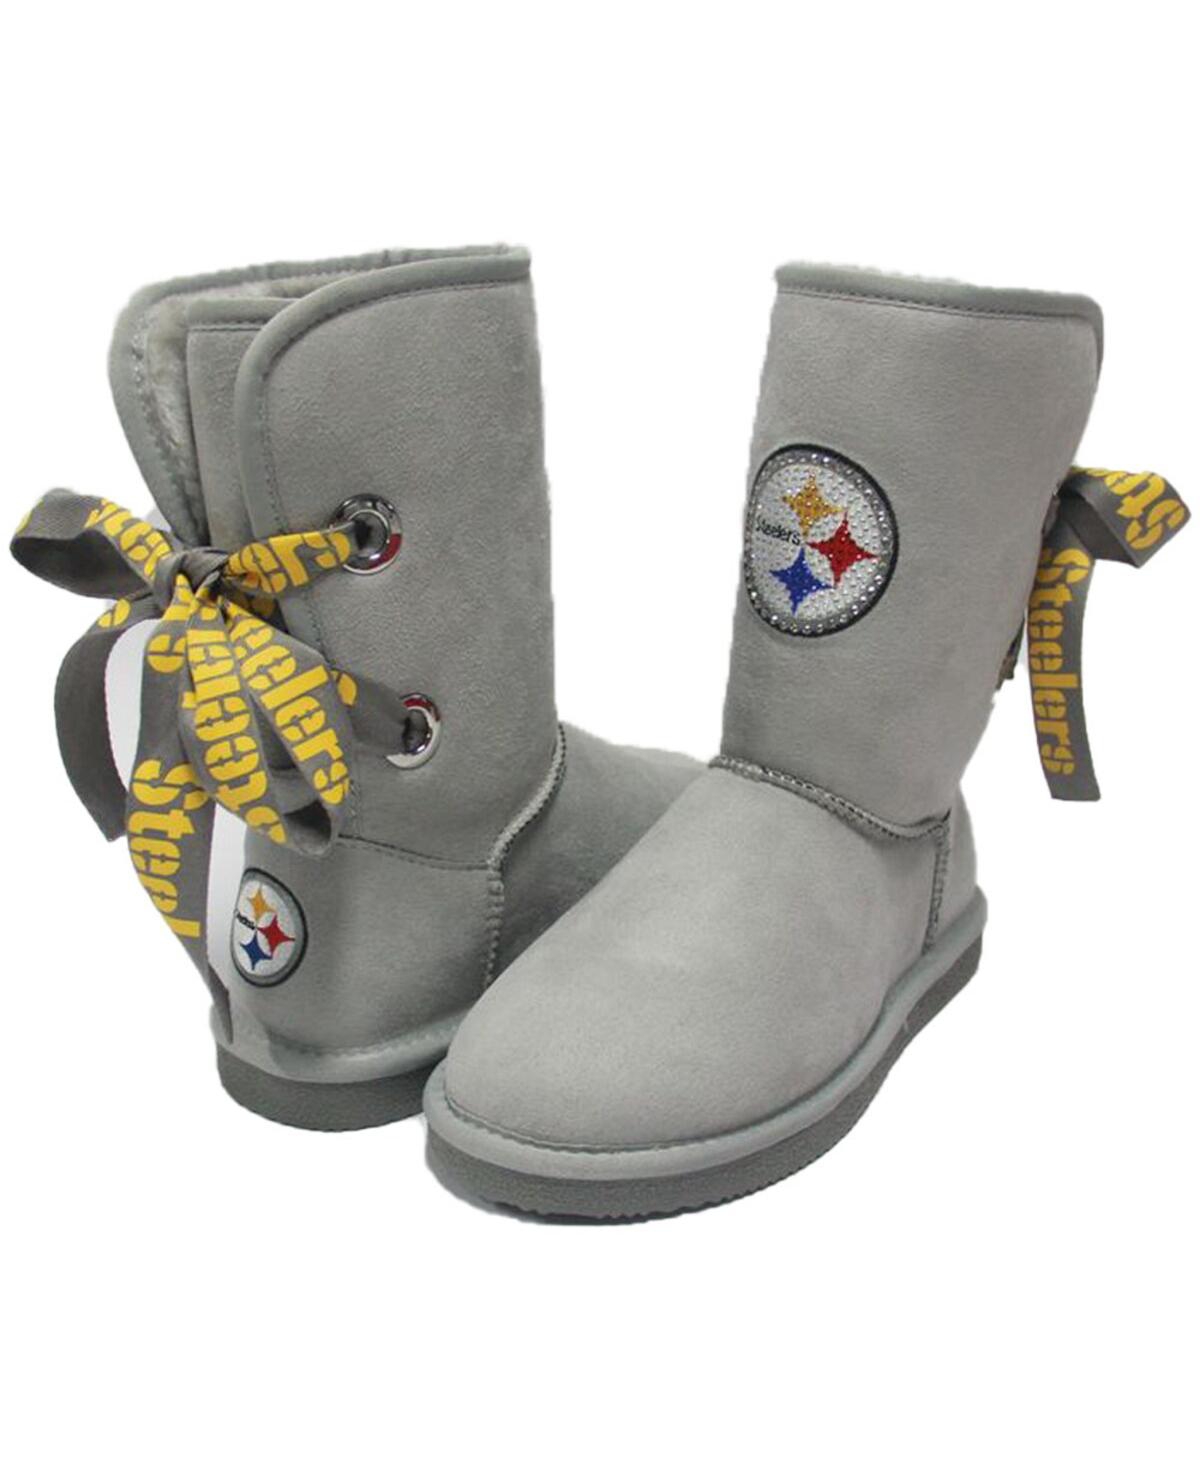 Women's Pittsburgh Steelers Ribbon Boots - Gray